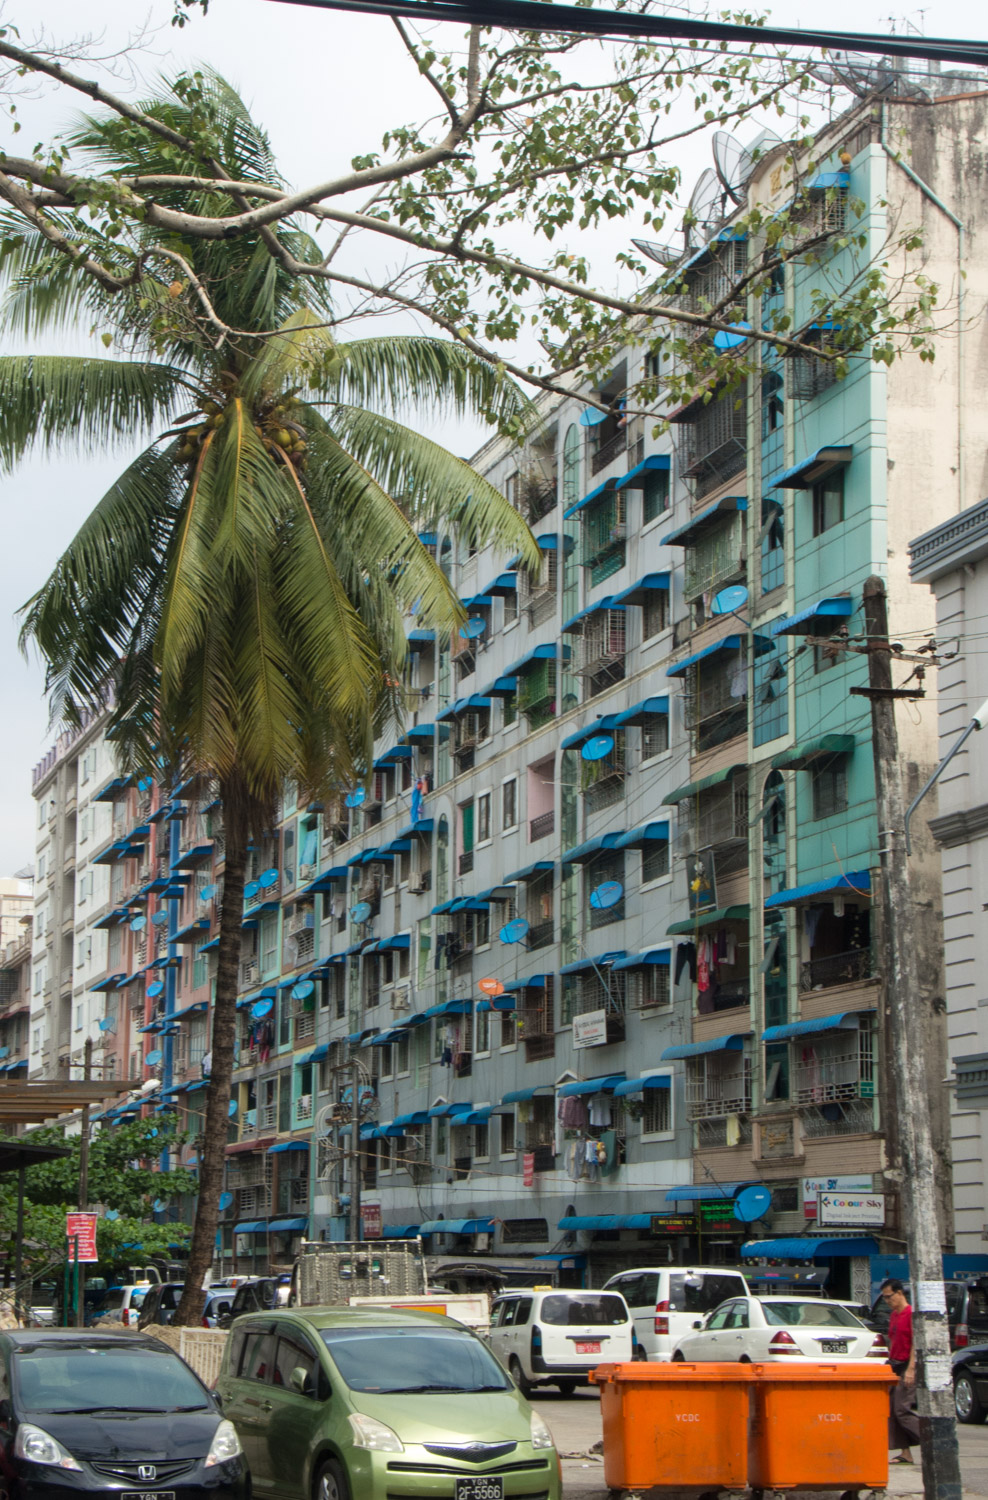 Blue awnings and satellite dishes are a ubiquitous feature of downtown Yangon.